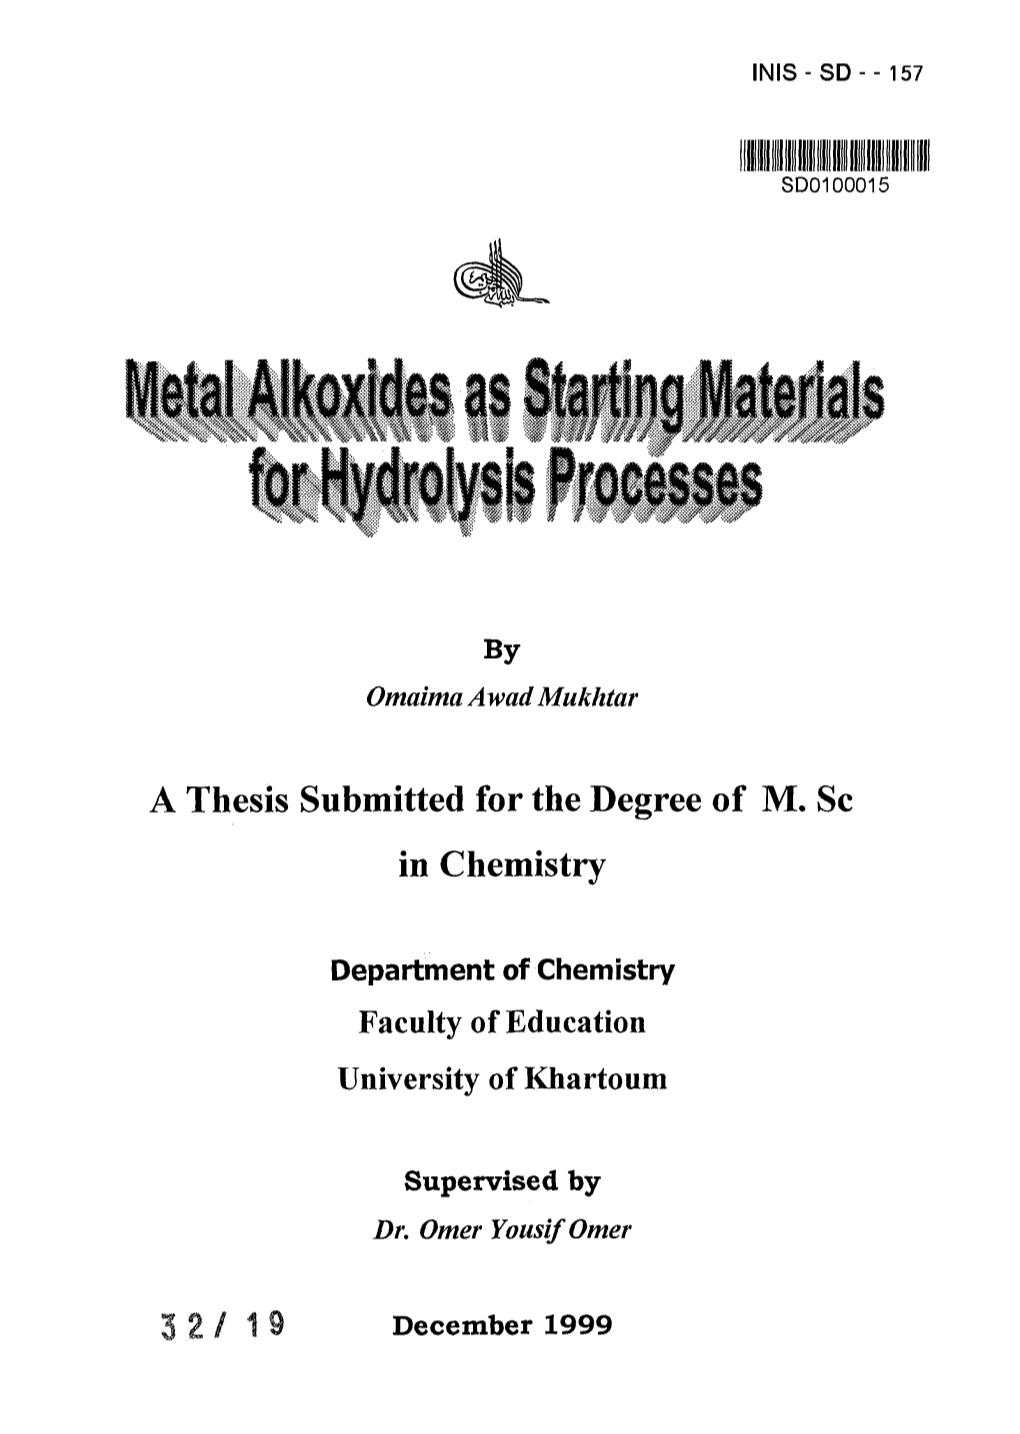 A Thesis Submitted for the Degree of M. Sc in Chemistry